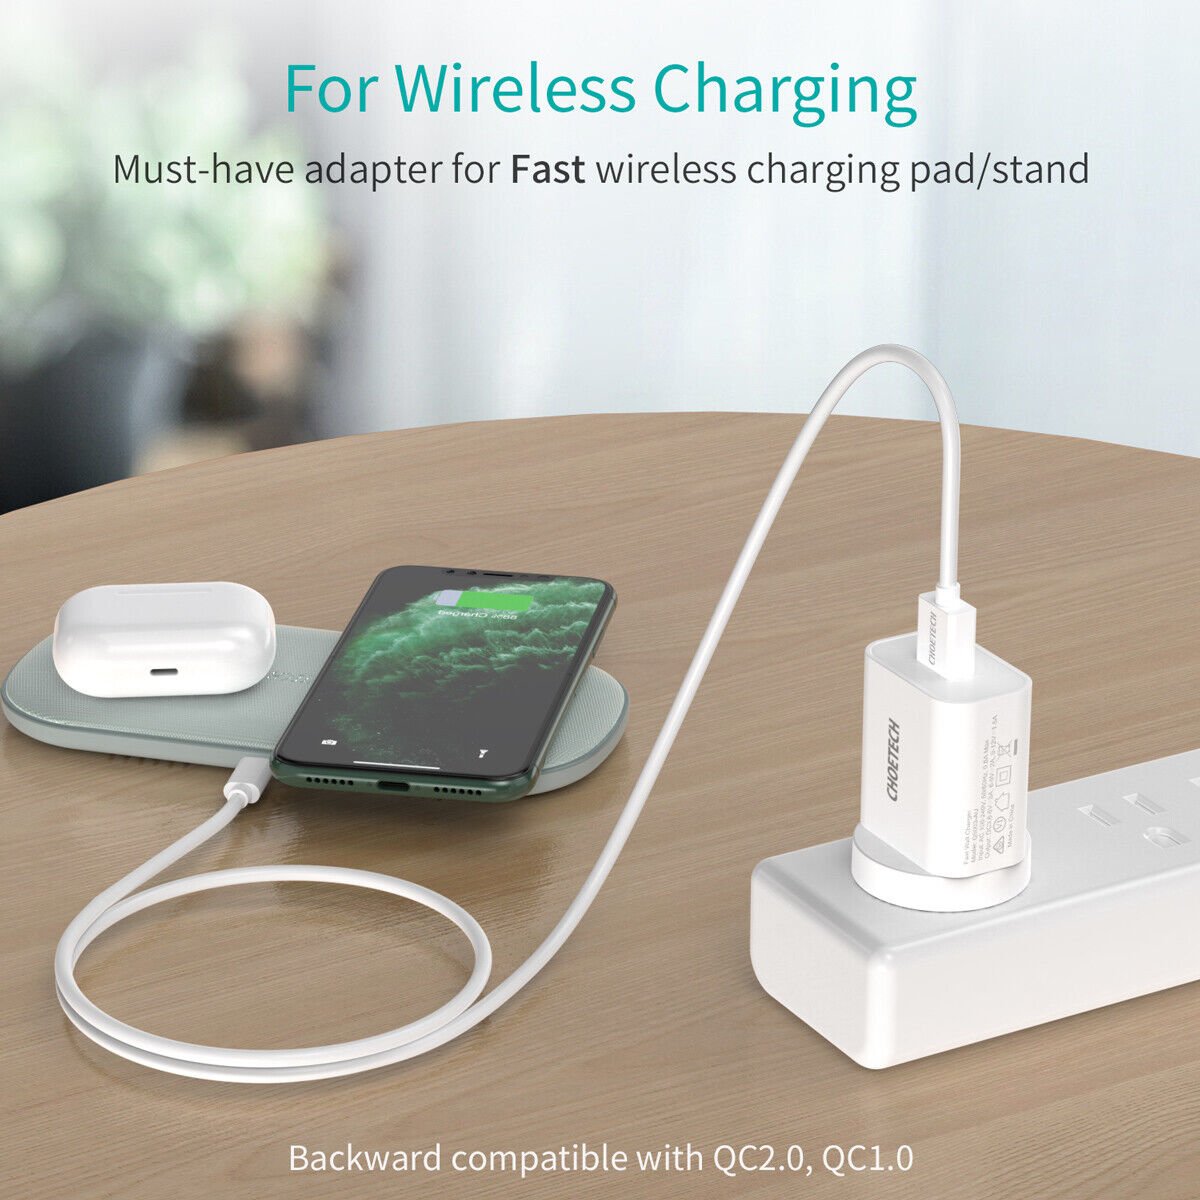 CHOETECH 18W USB Wall Charger Quick Charge QC 3.0 Power Adapter Fast Charging AU Plug White